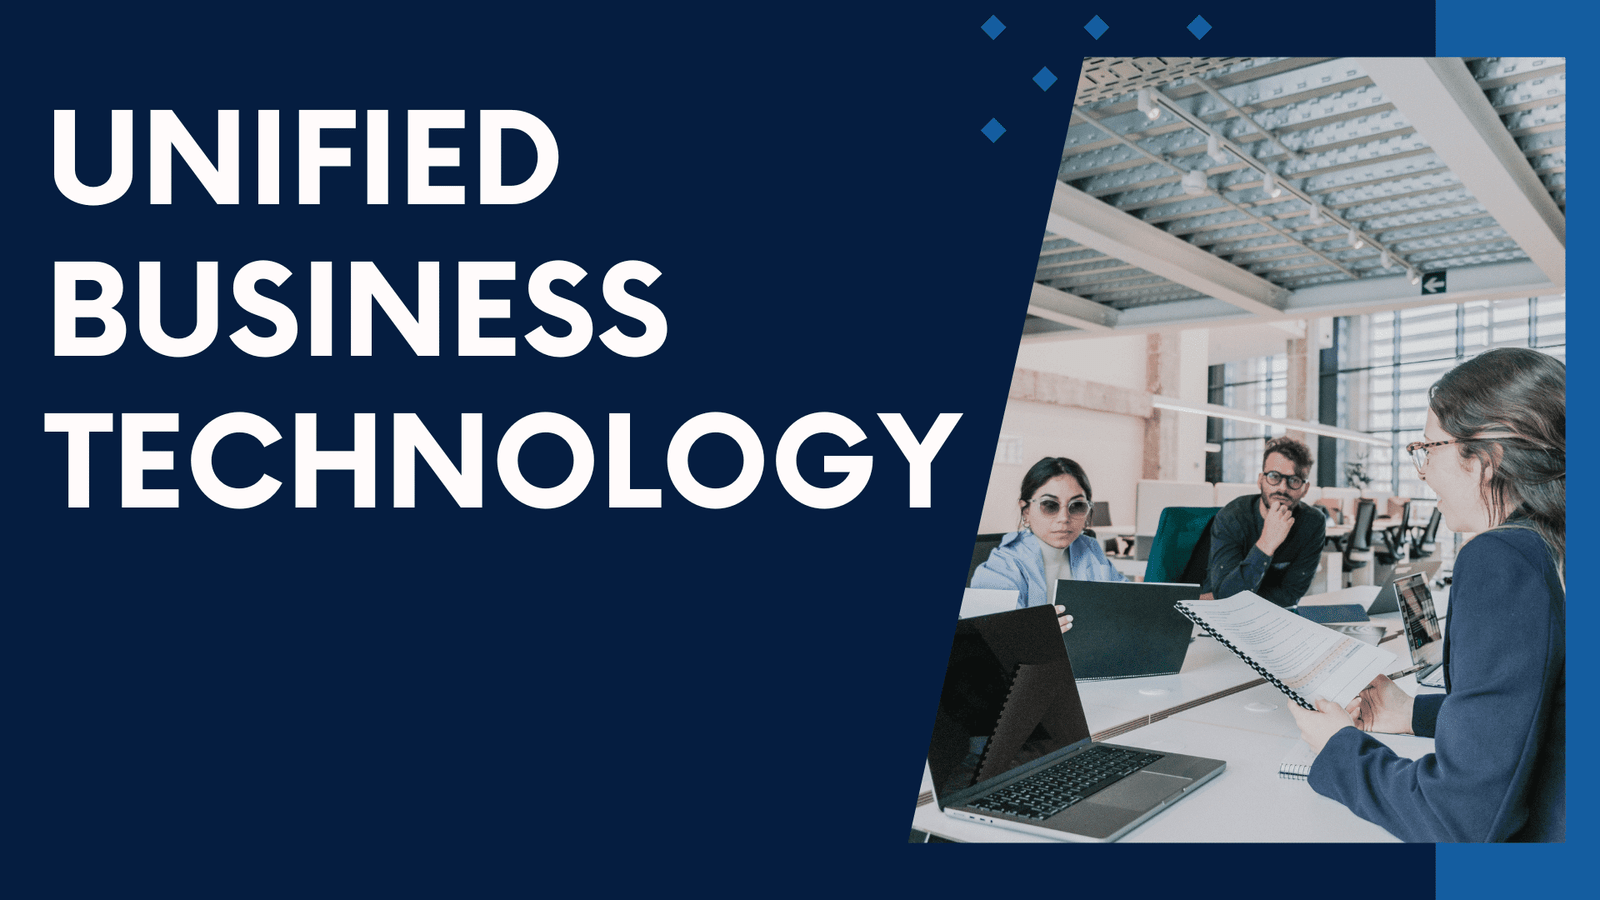 Unified Business Technology Inc. is a business center best known for manufacturing electronics, engineering, advanced IT and telecommunication services